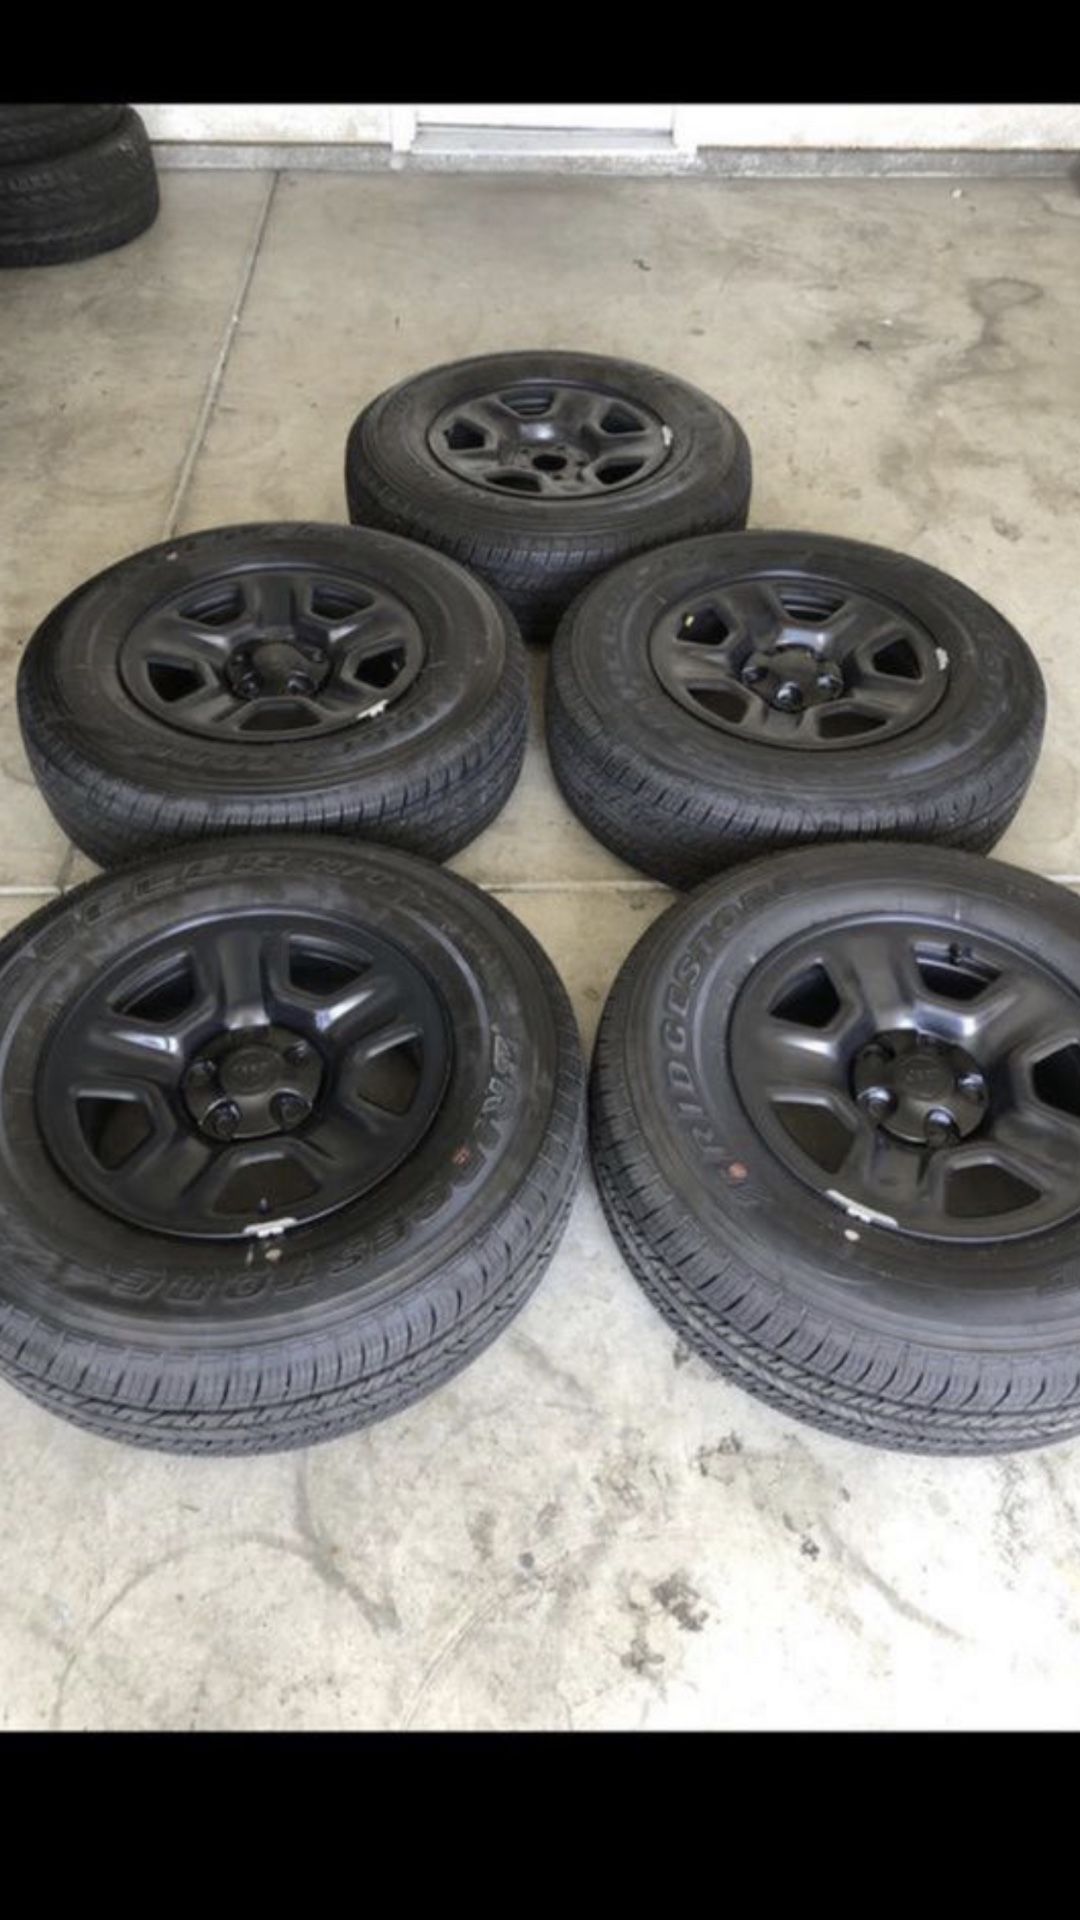 Brand new factory Jeep Wrangler set of five 17 inch wheels and tires with a Bridgestone dueler 245/75/17